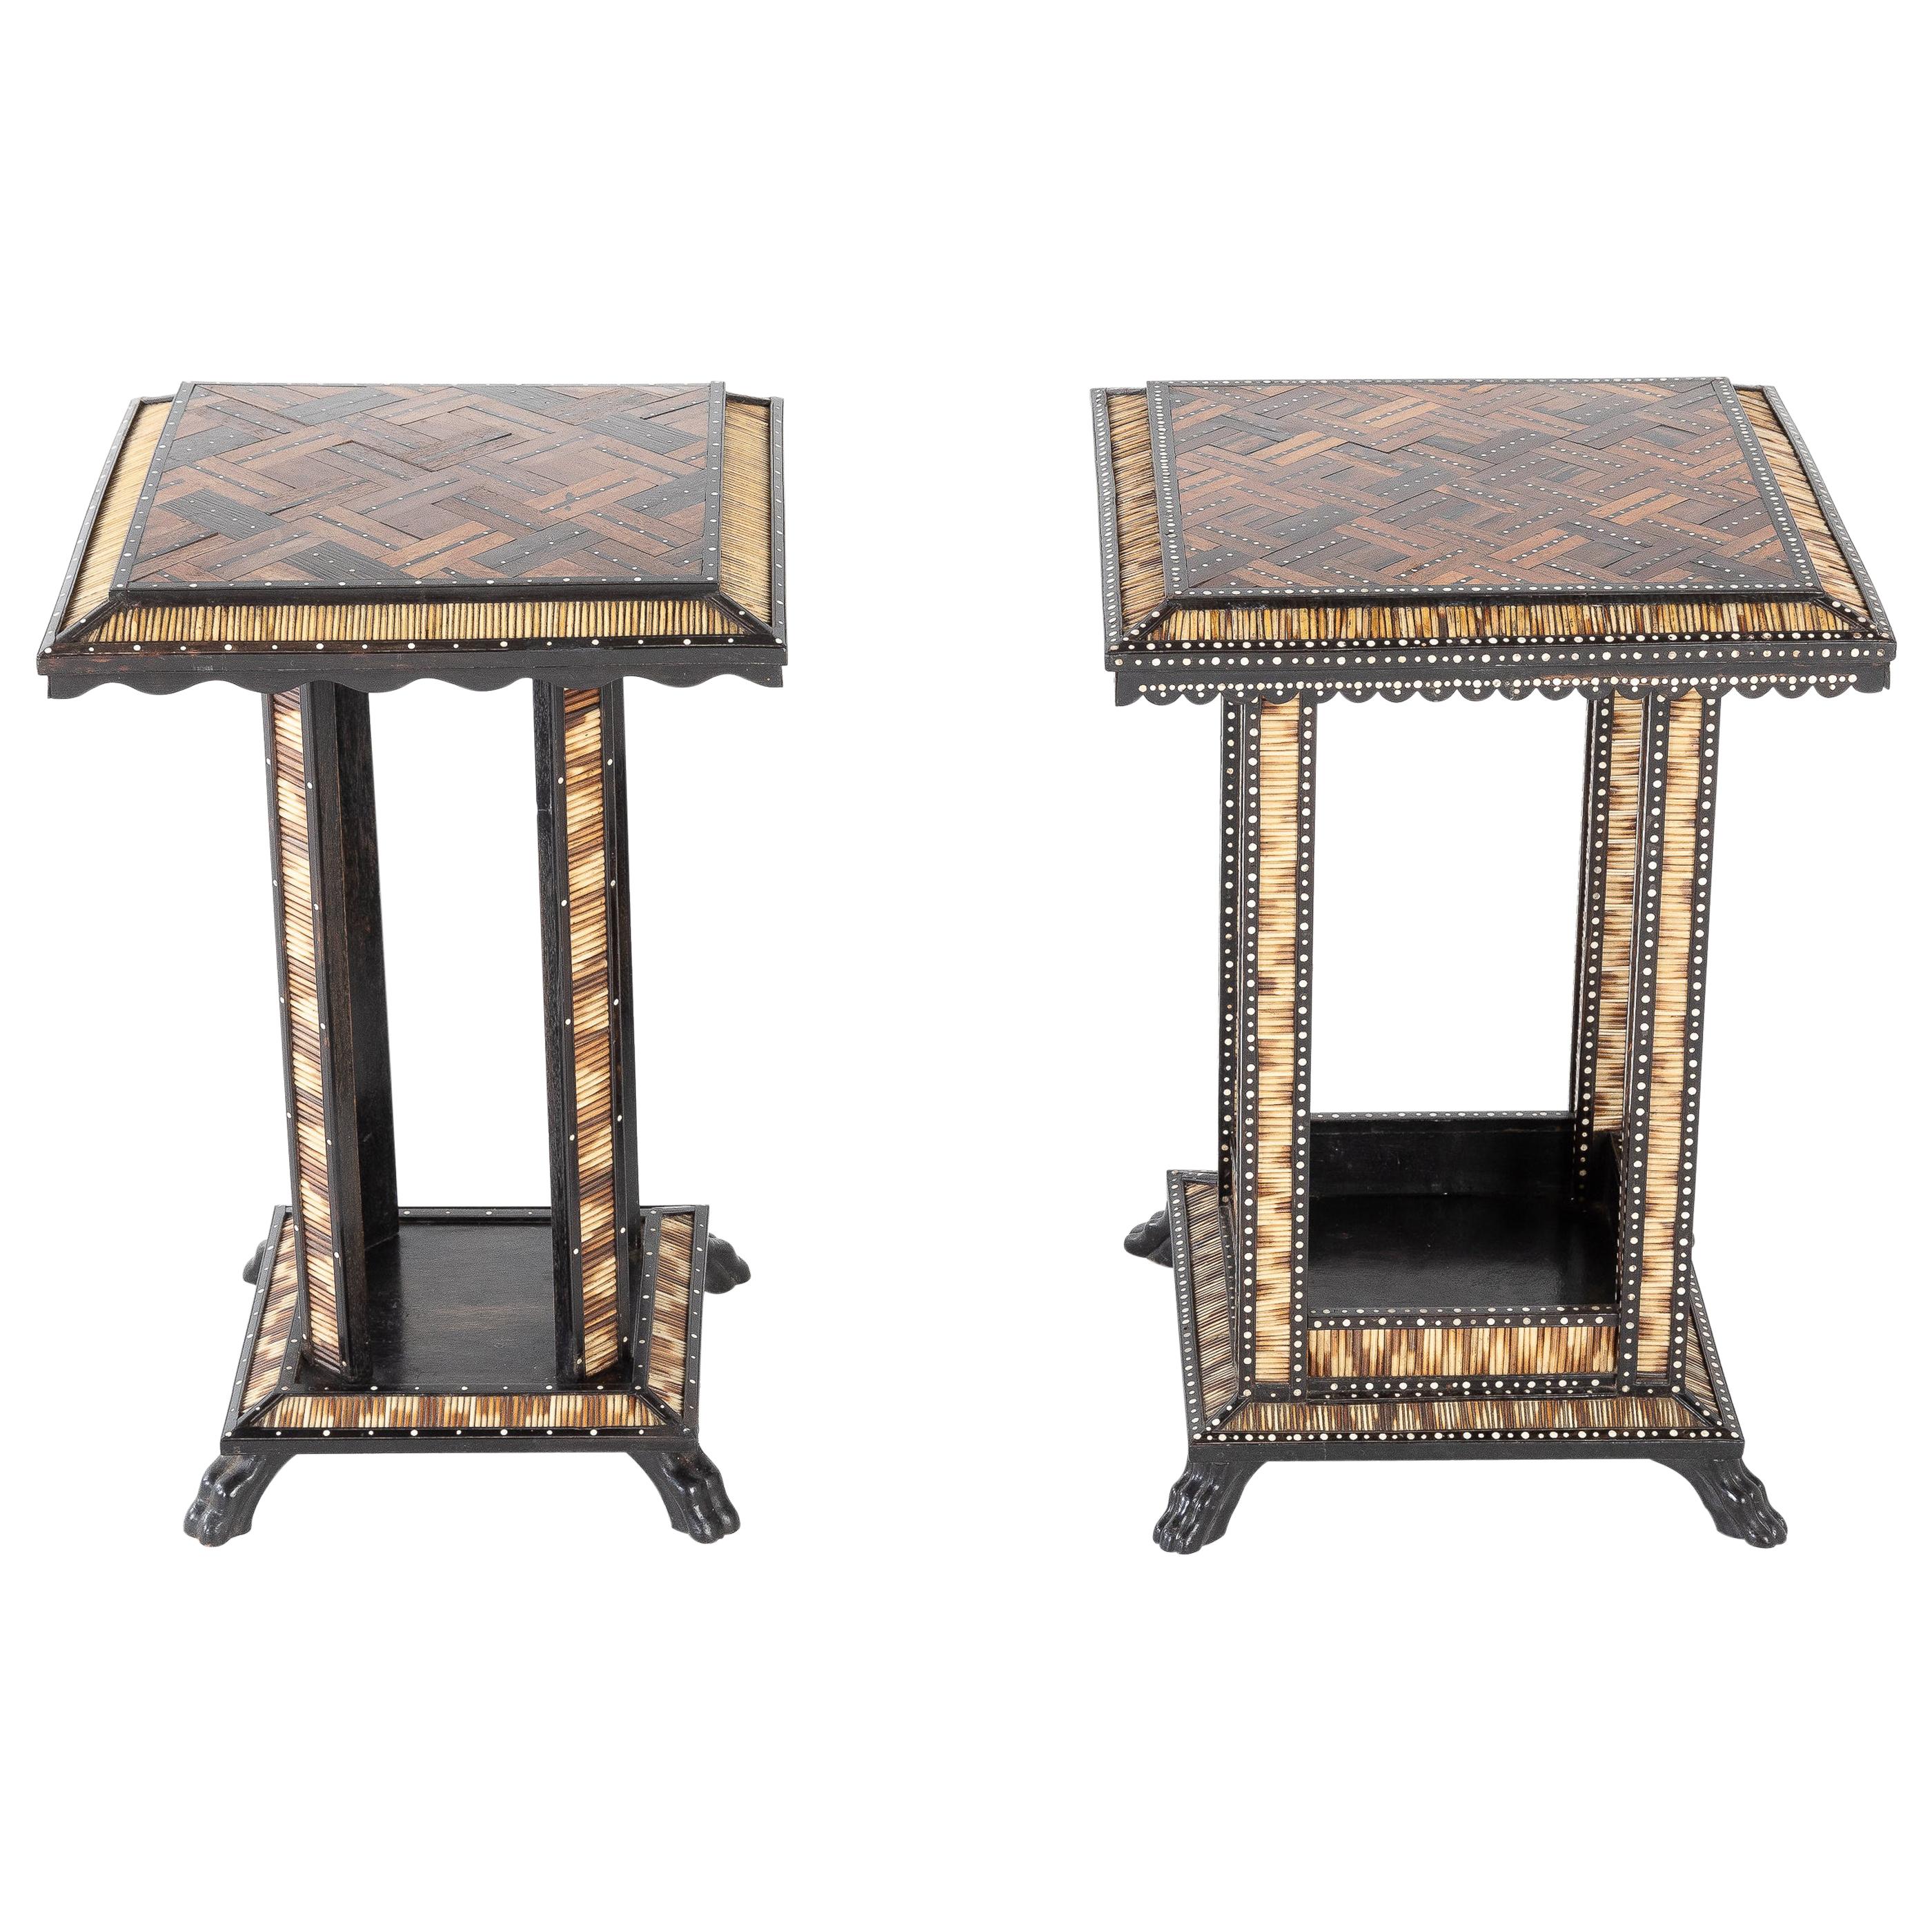 Matched Pair of Late 19th Century Ceylonese Porcupine Occasional Tables